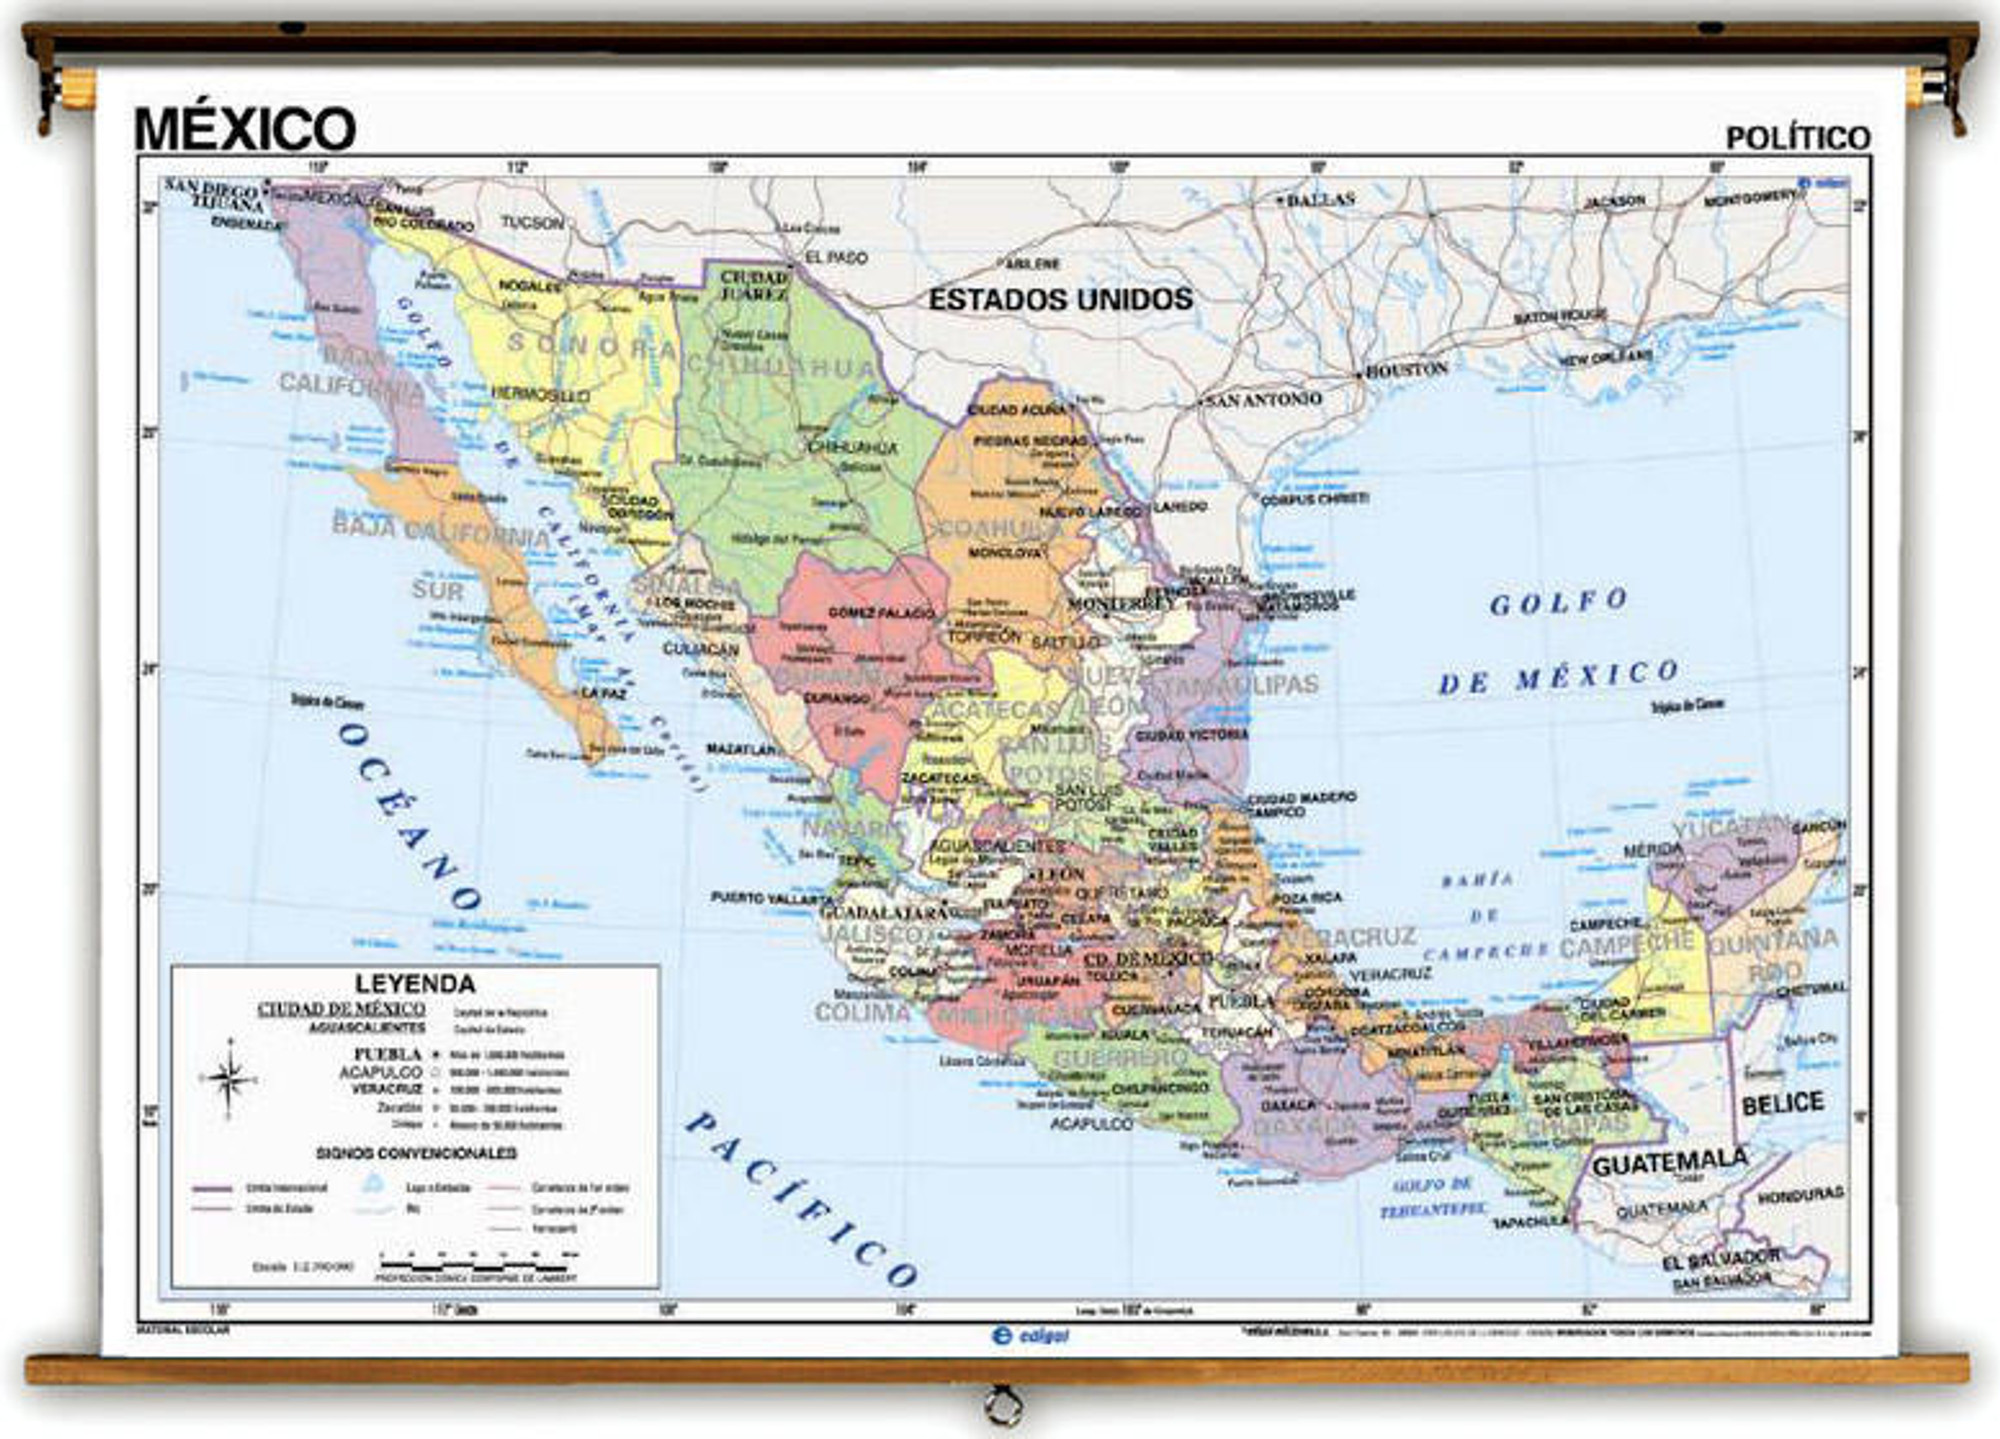 Spanish Language Mexico Physical/Political Map on Spring Roller, image 1, World Maps Online